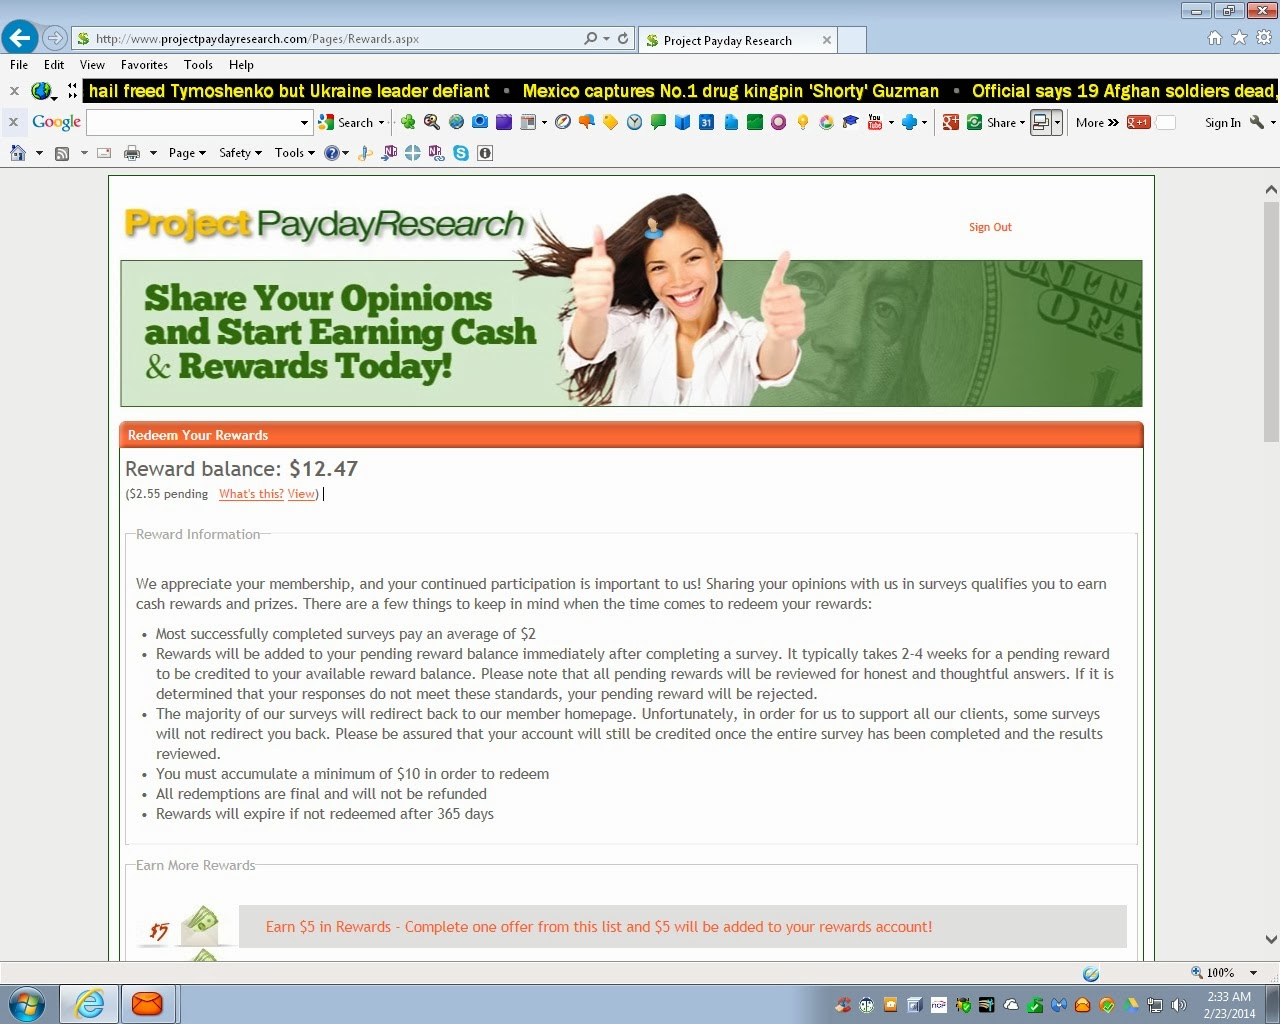 Project Payday Research